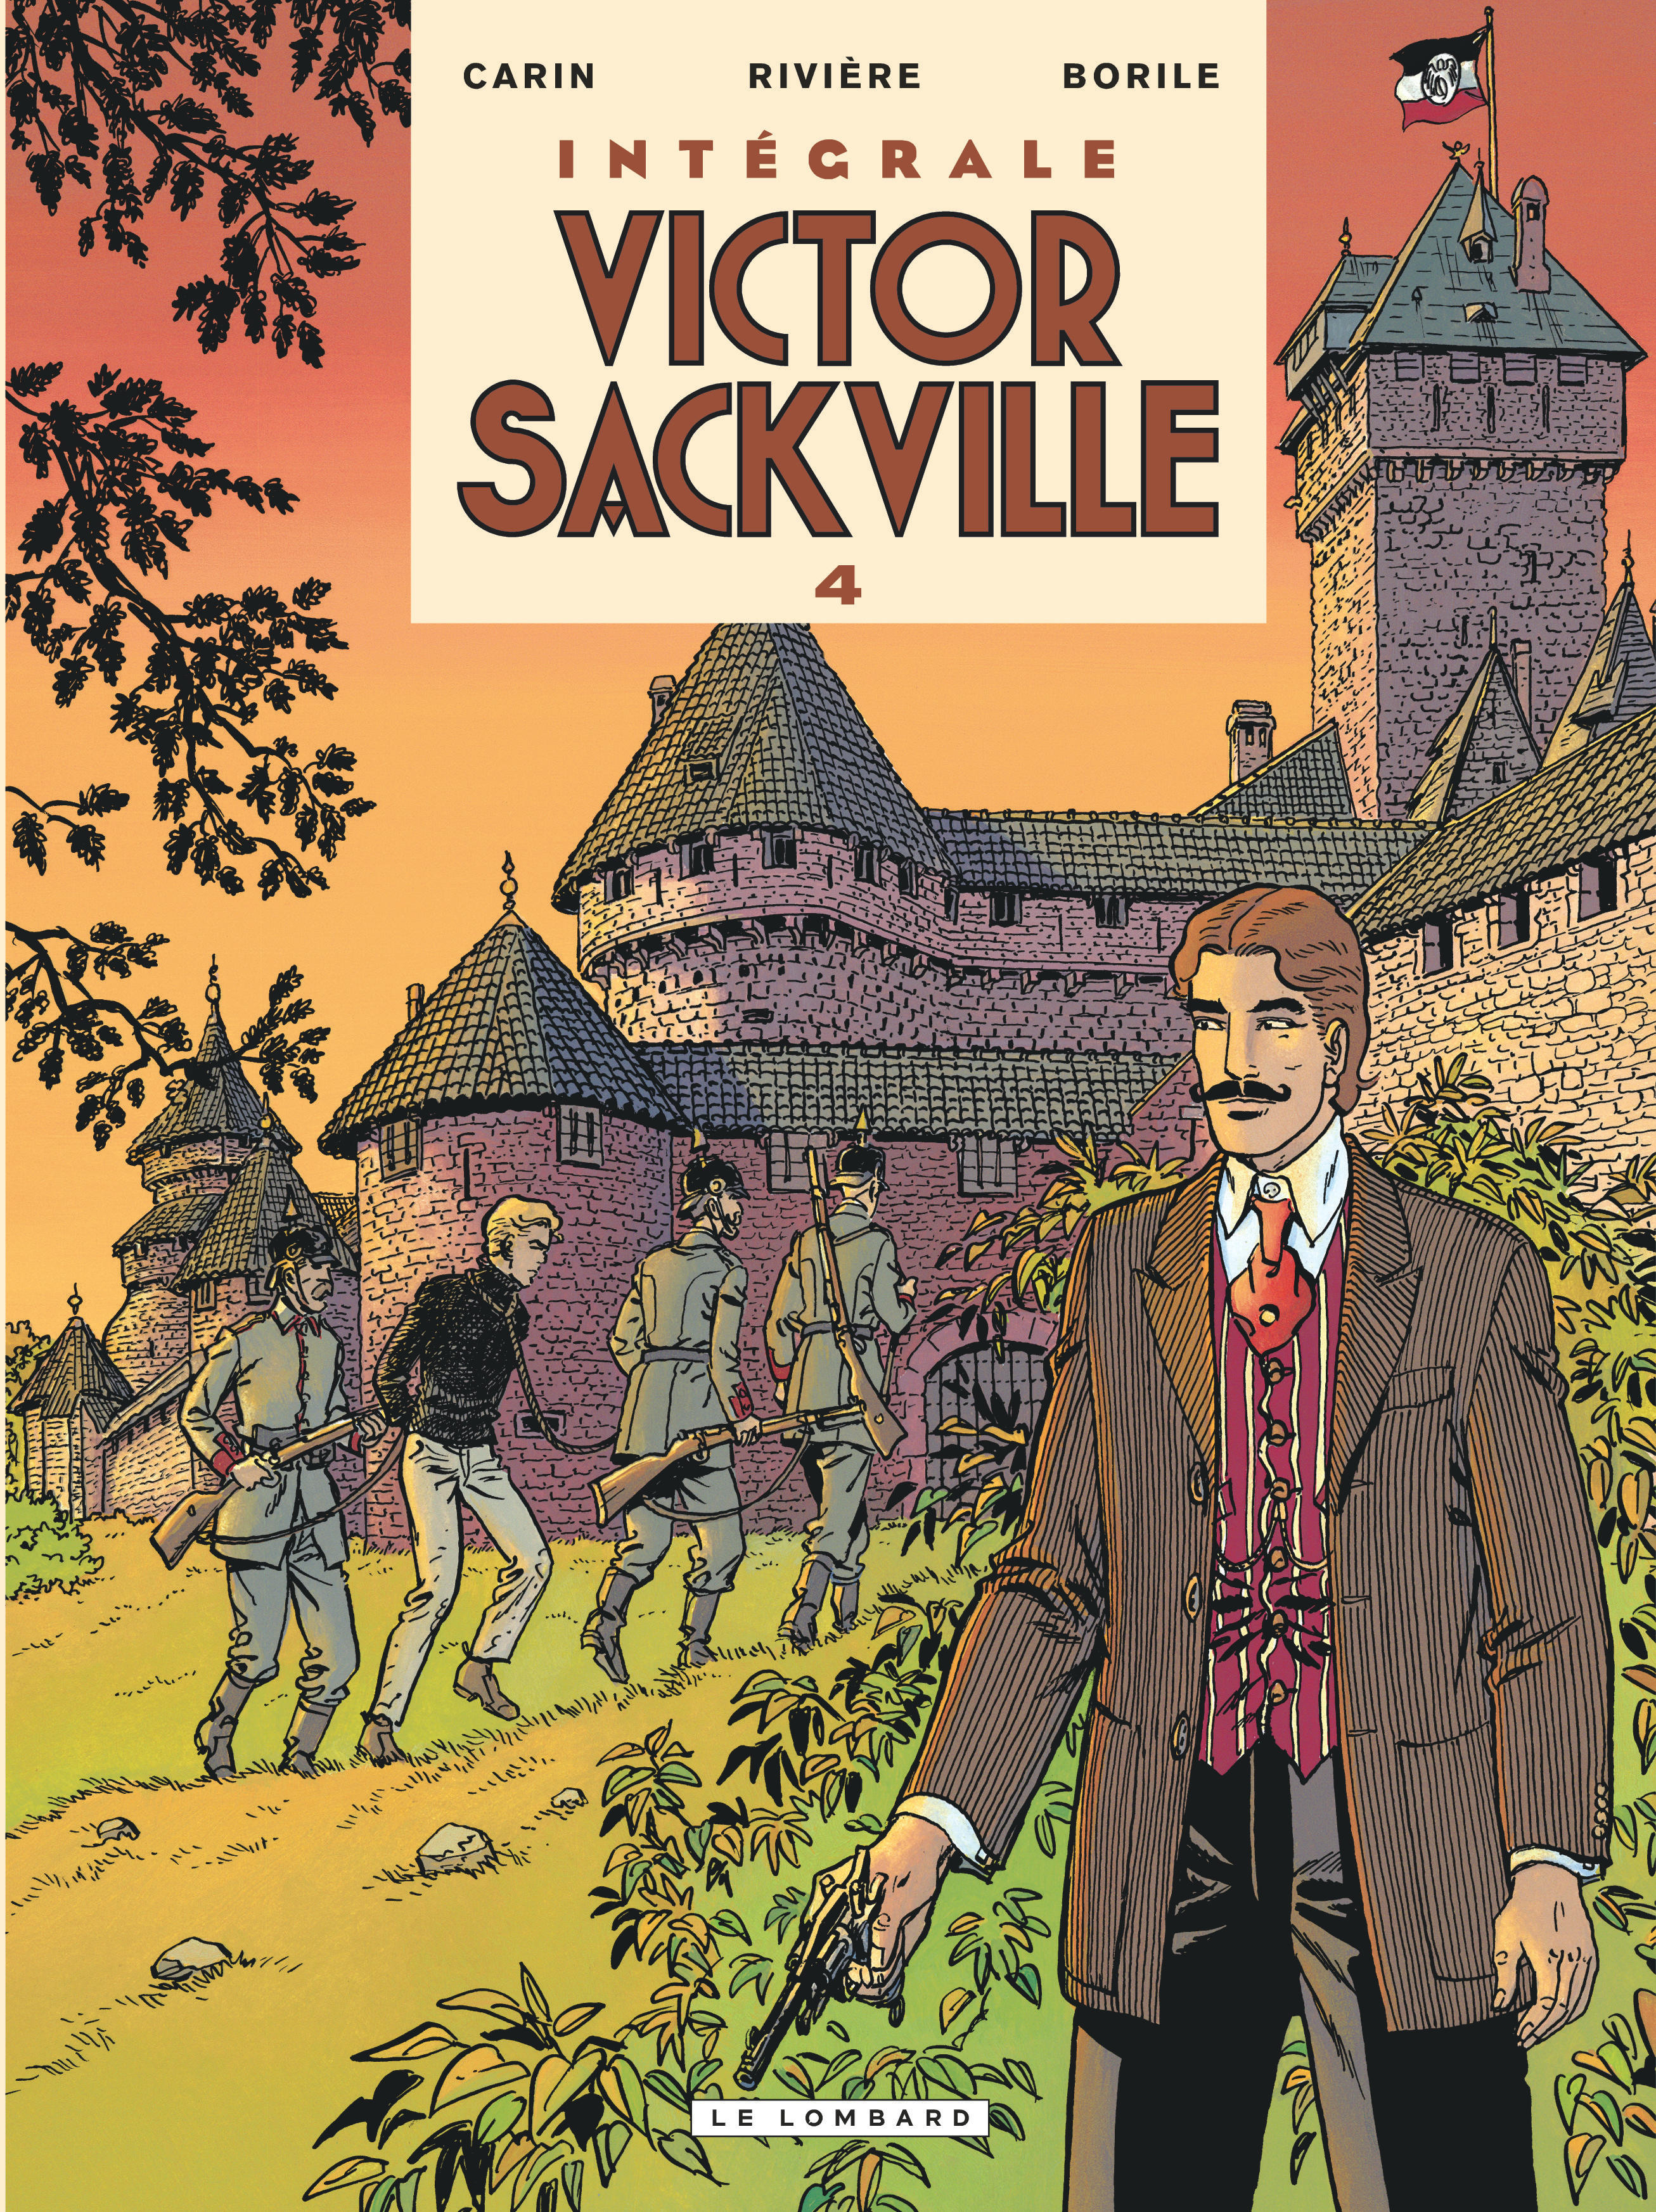 Intégrale Victor Sackville – Tome 4 - couv